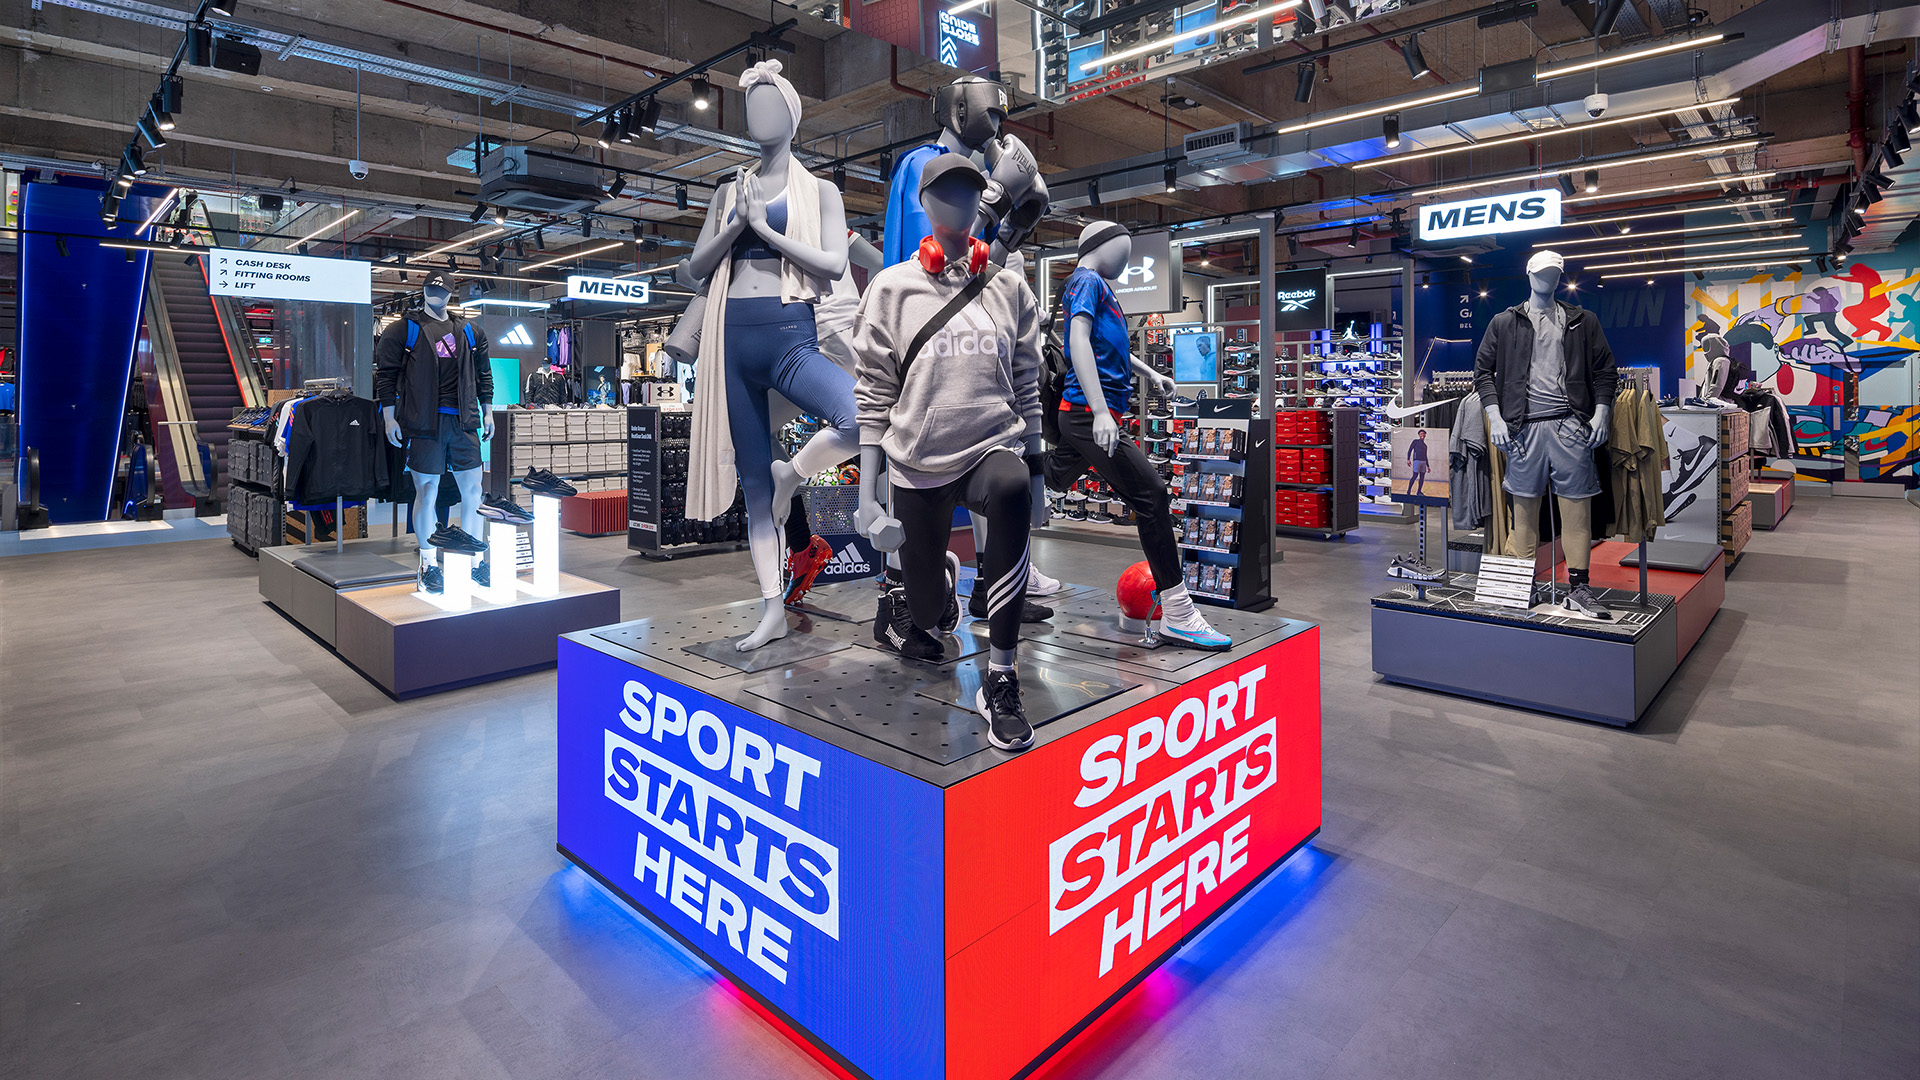 Frasers Group to open Sports Direct flagship at Manchester Arndale